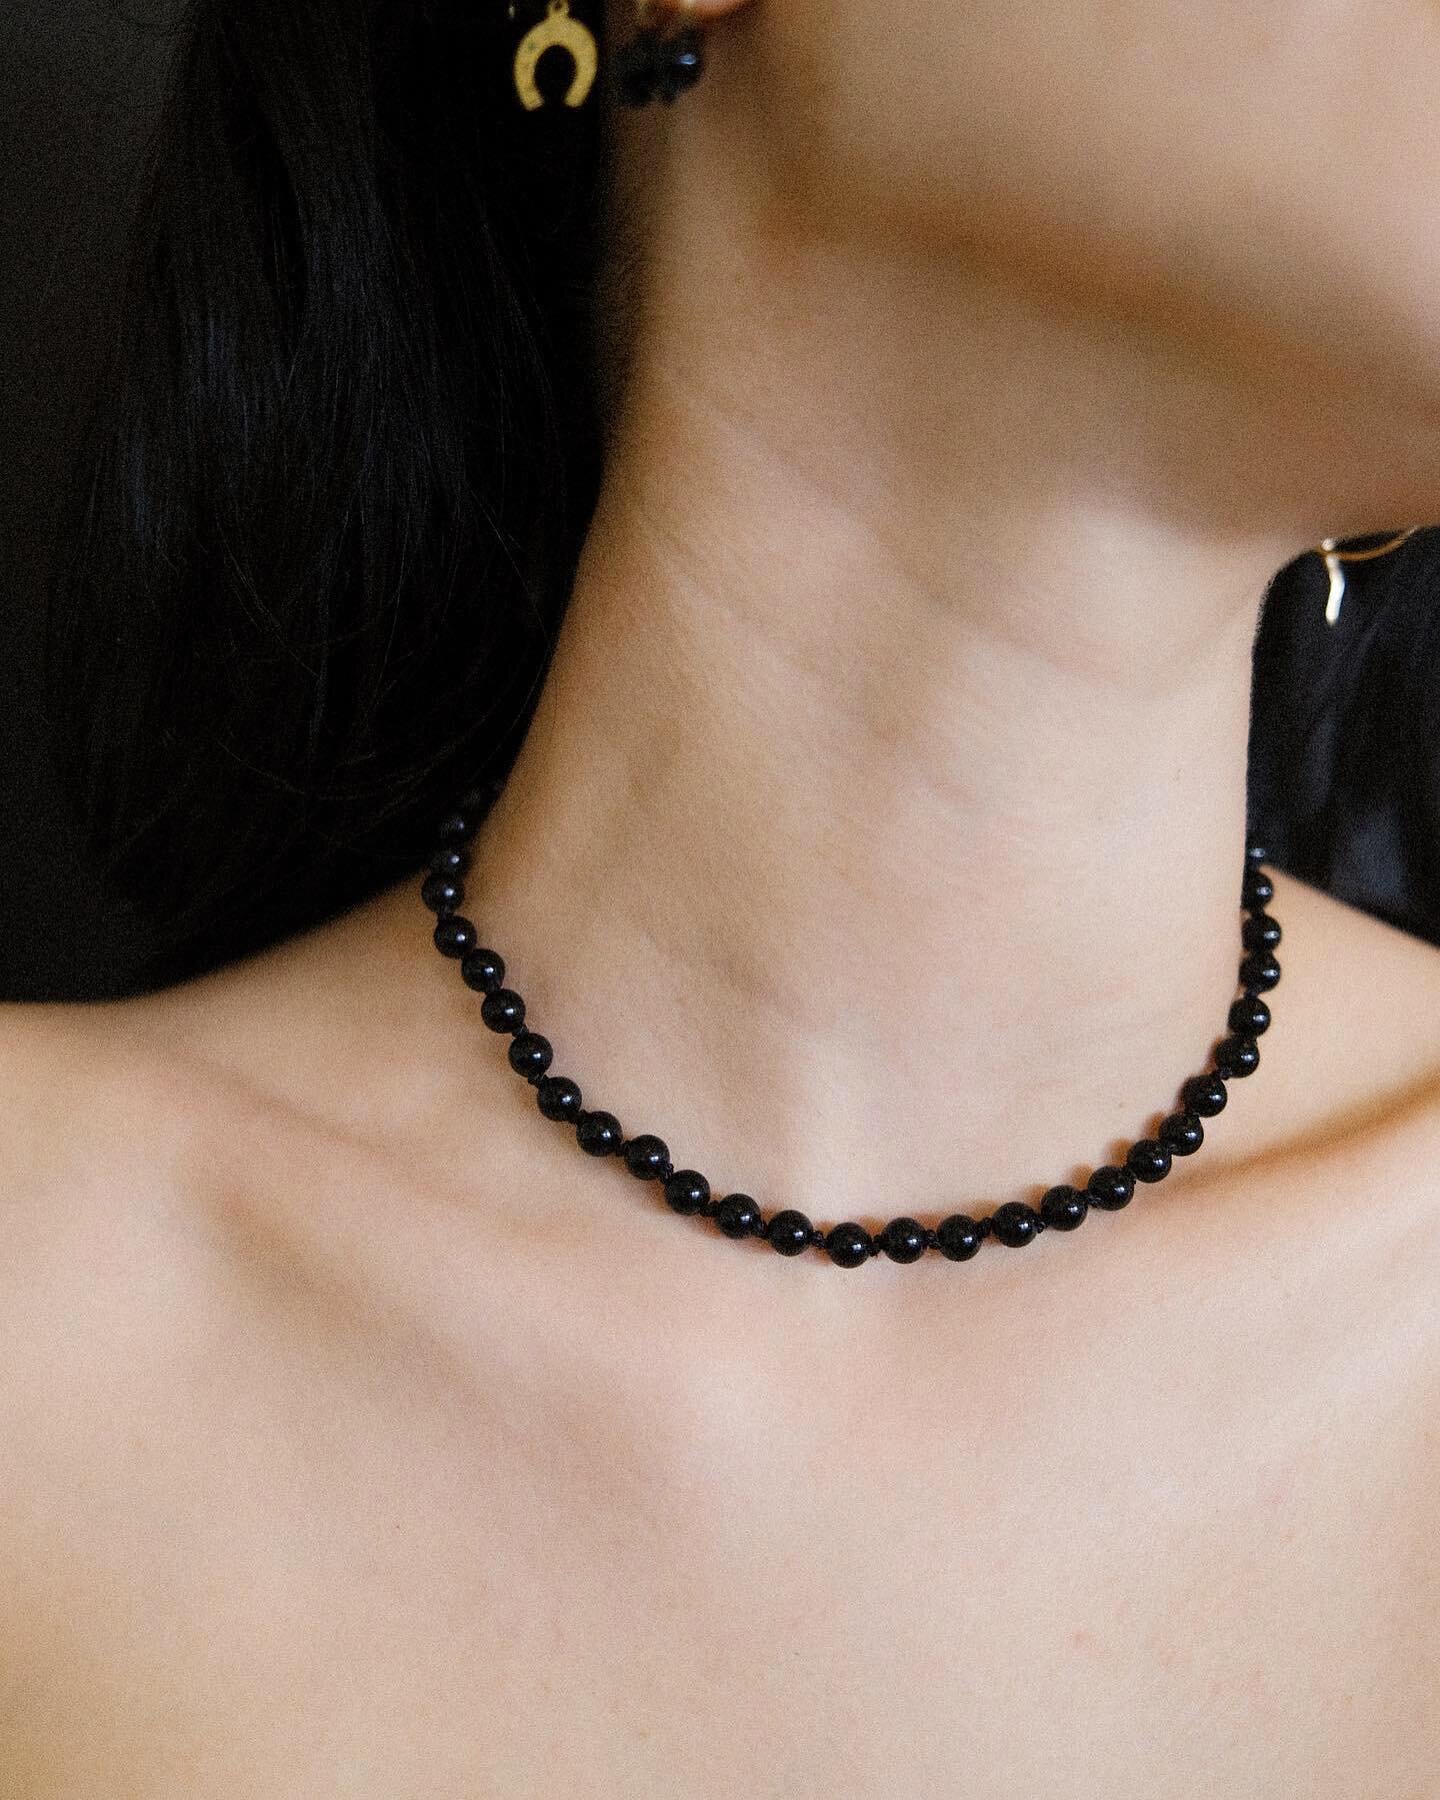 The Baby Pace Onyx Knotted Silk Choker 🖤